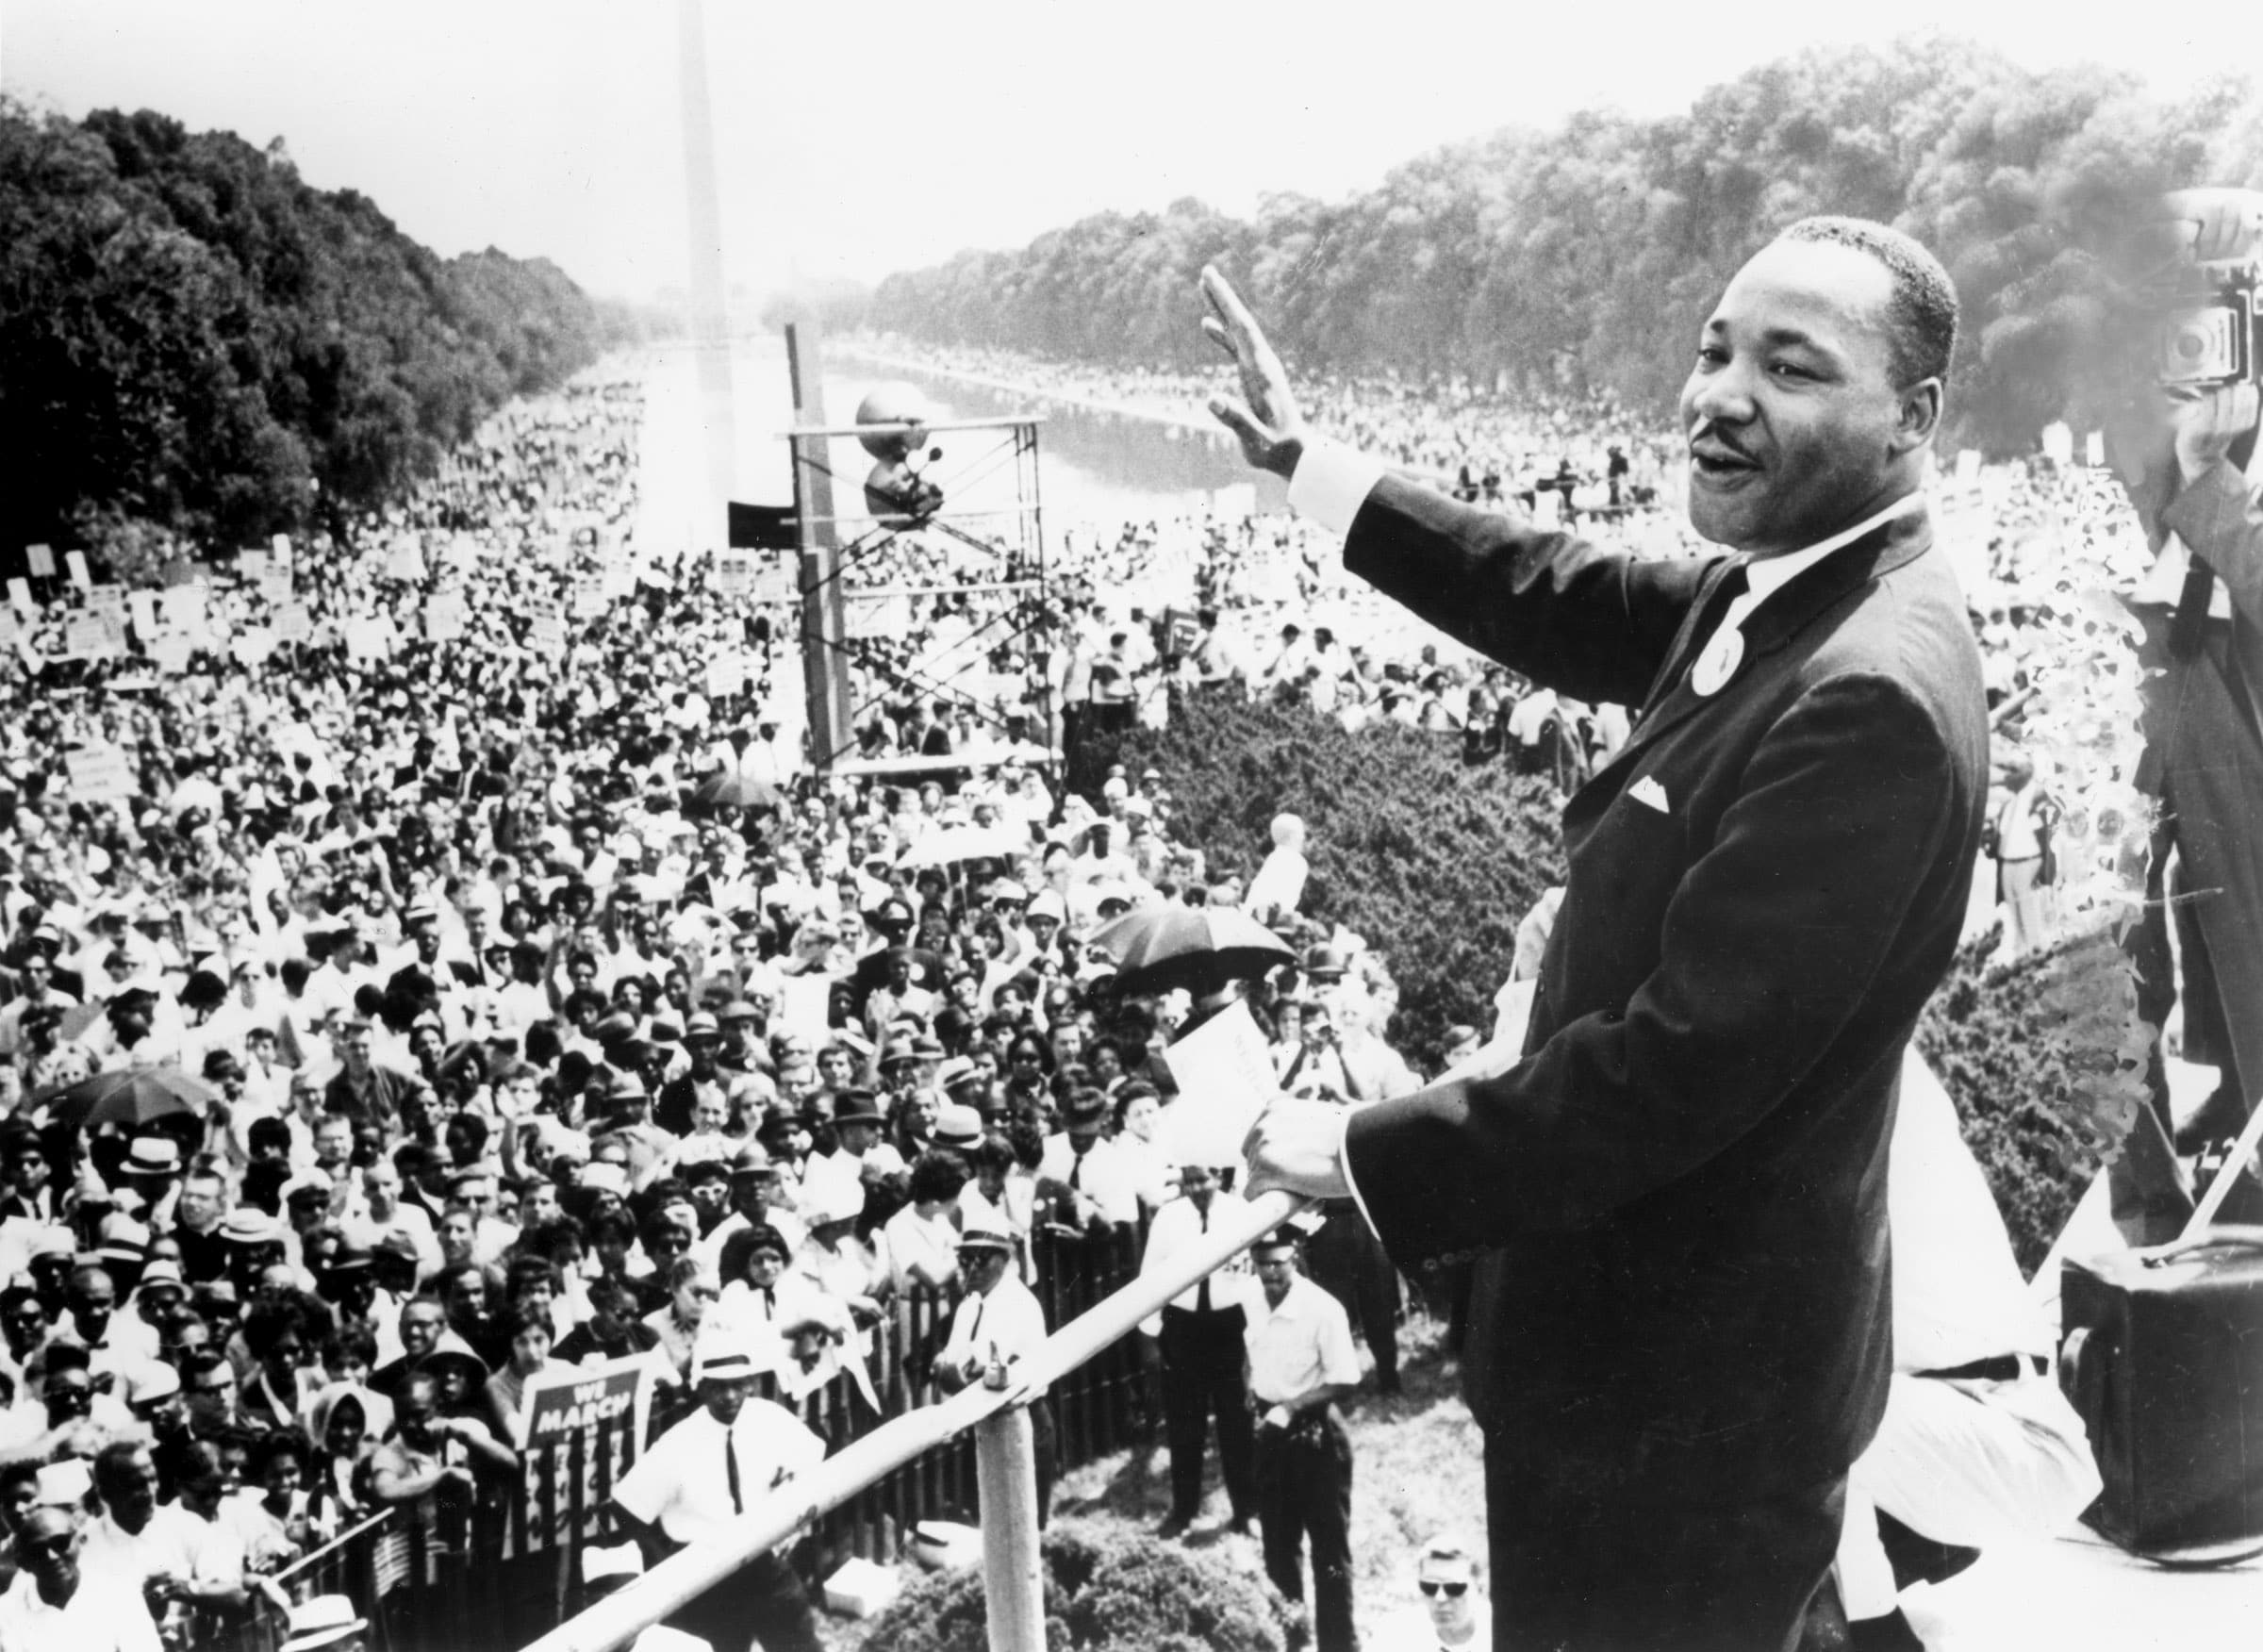 DR. MARTIN LUTHER KING, JR. joyously addresses a mass audience in Washington, DC, 1963